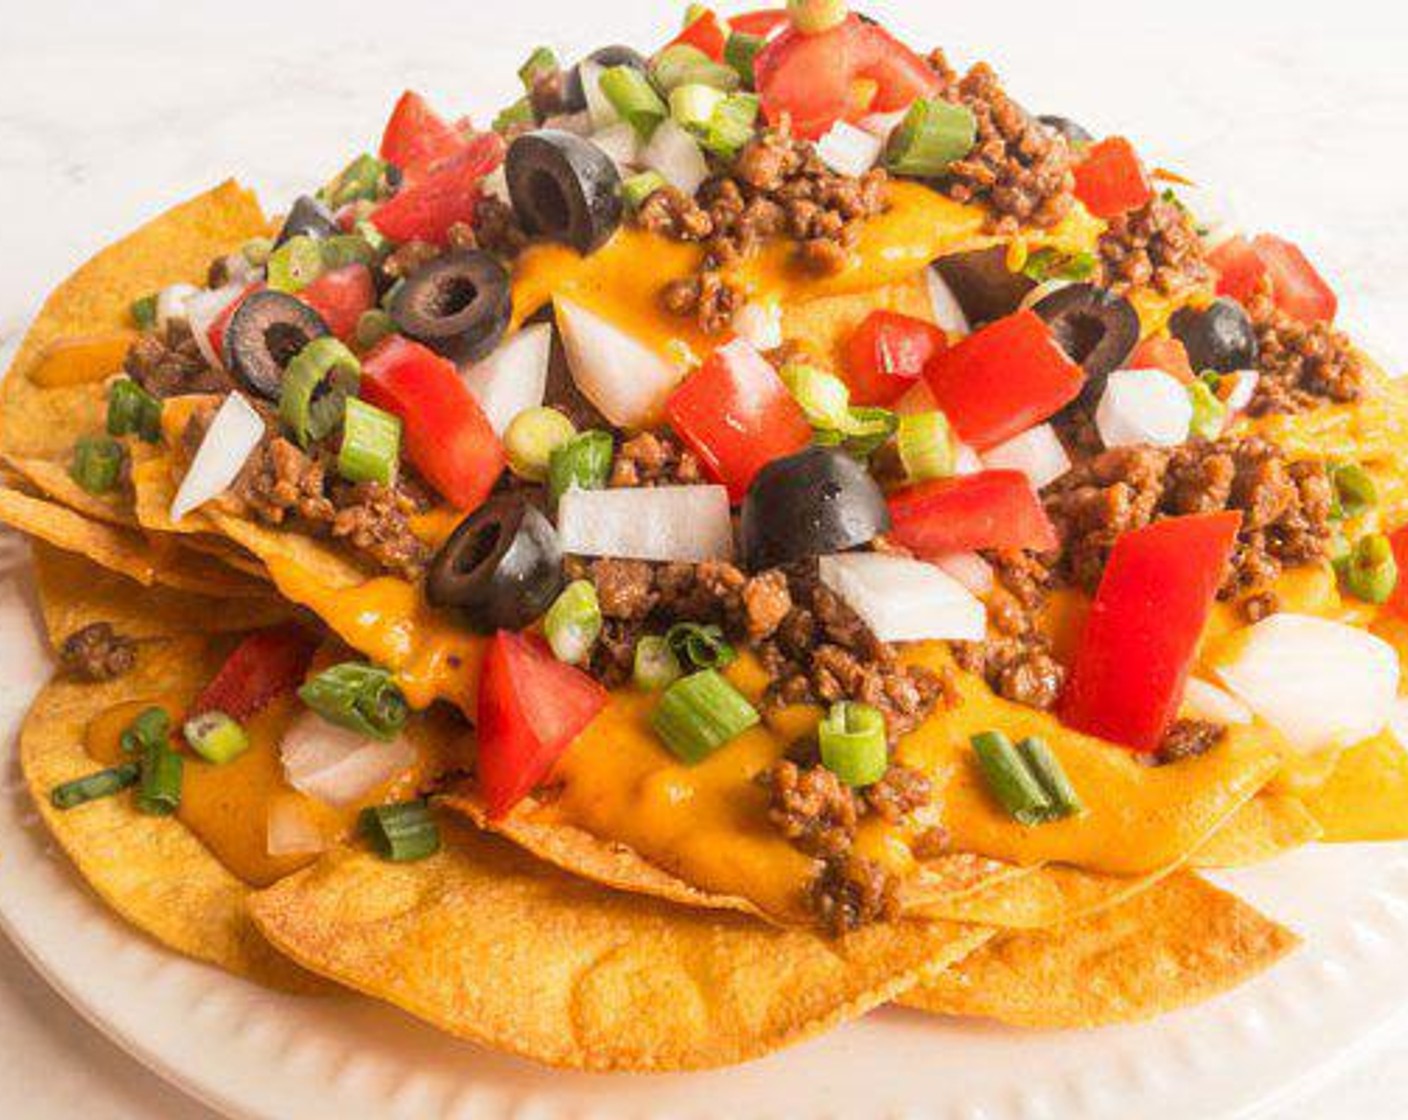 step 7 To assemble nachos, layer half of tortilla, beef, Vegan Nacho Cheese Sauce (1 1/2 cups), Tomato (1), Onion (1/2), repeat layers and garnish with Scallion (1 stalk) and Black Olives (to taste) on top.